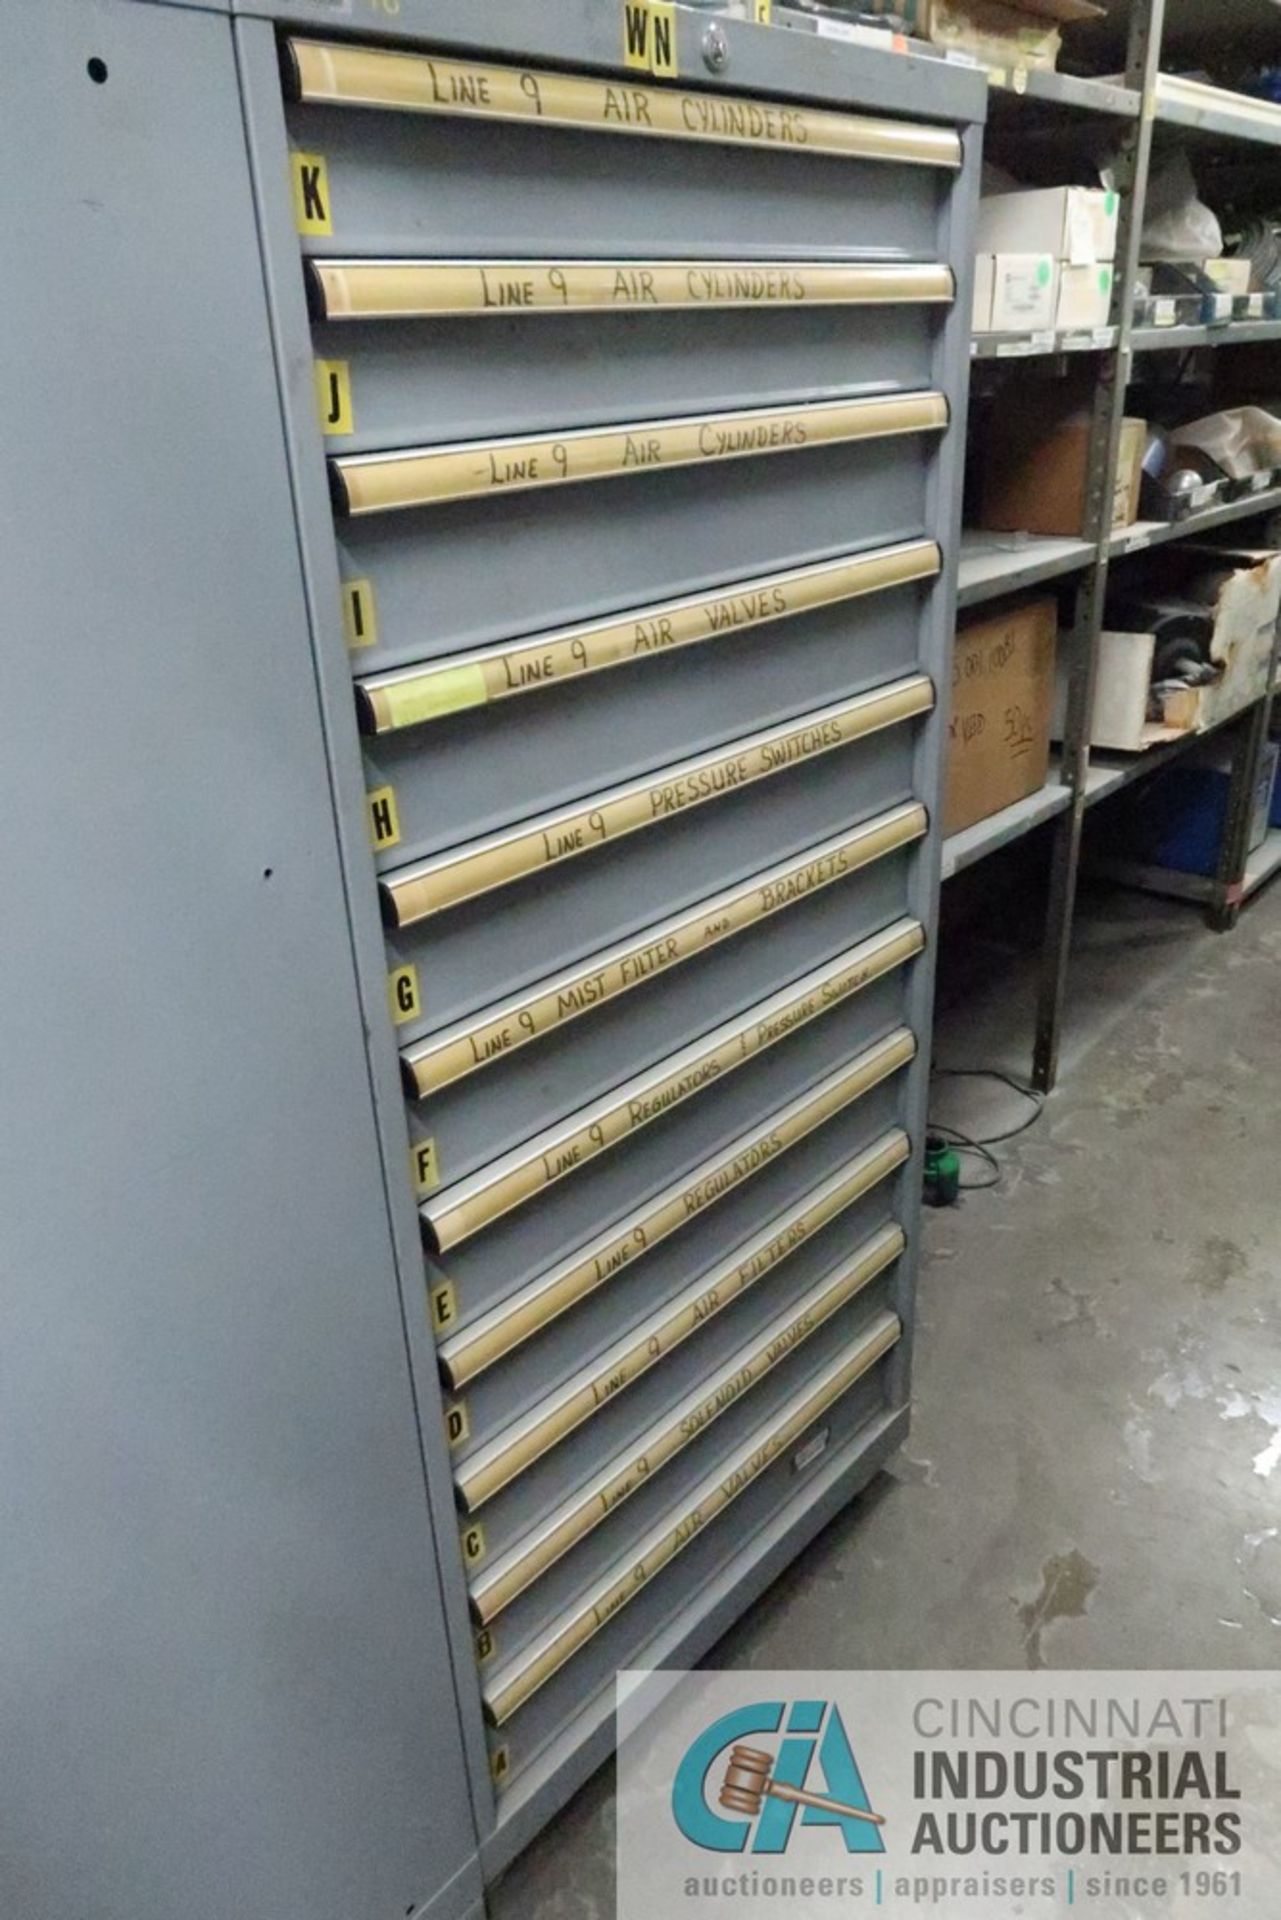 11-DRAWER LISTA CABINET WITH CONTENTS INCLUDING MISCELLANEOUS AIR CYLINDERS, VALVES, SWITCHES,